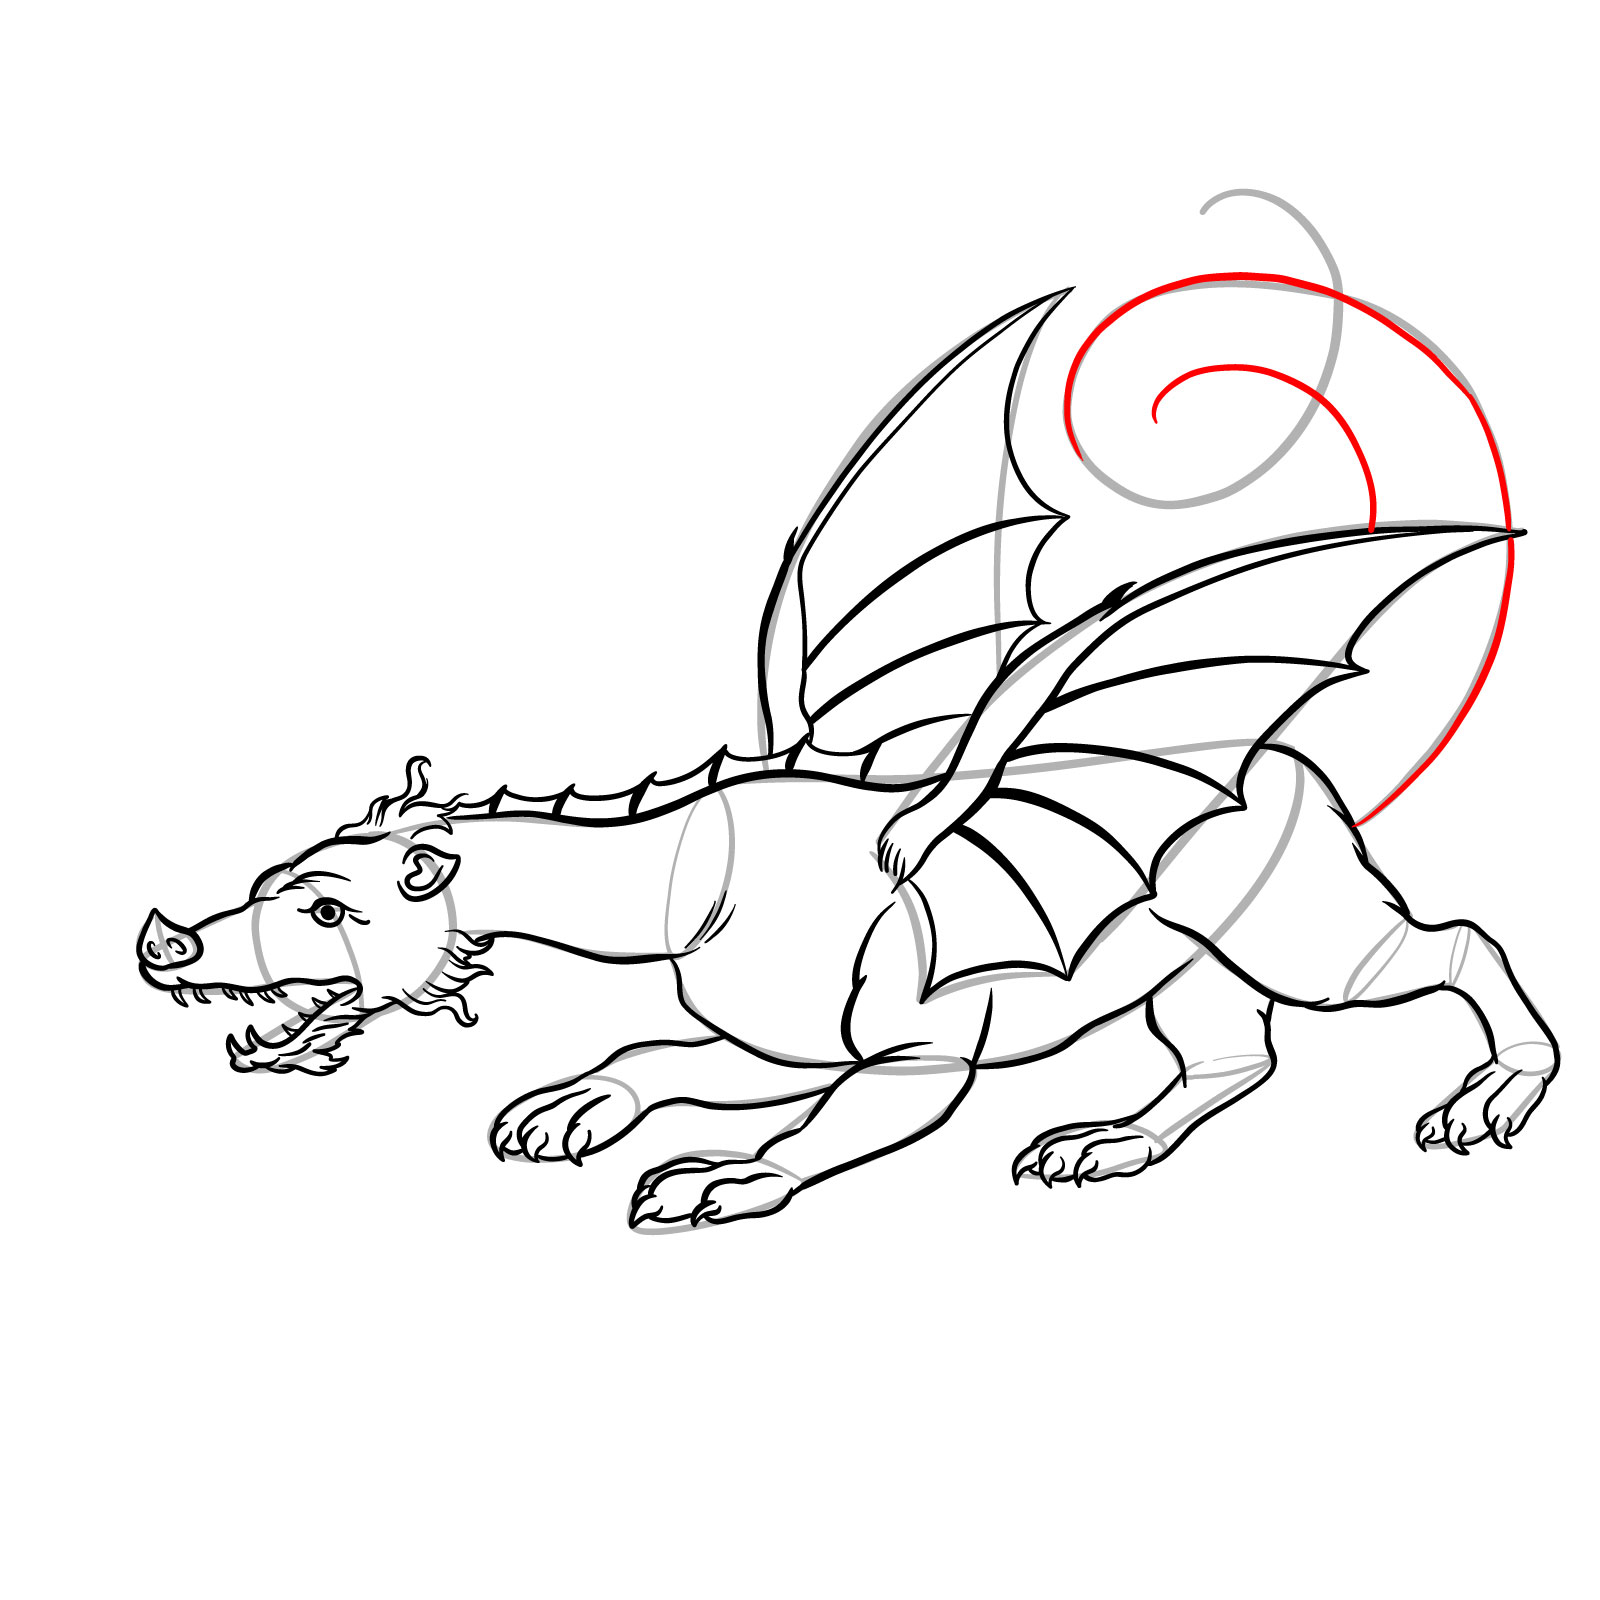 How to draw a classic European dragon - step 40